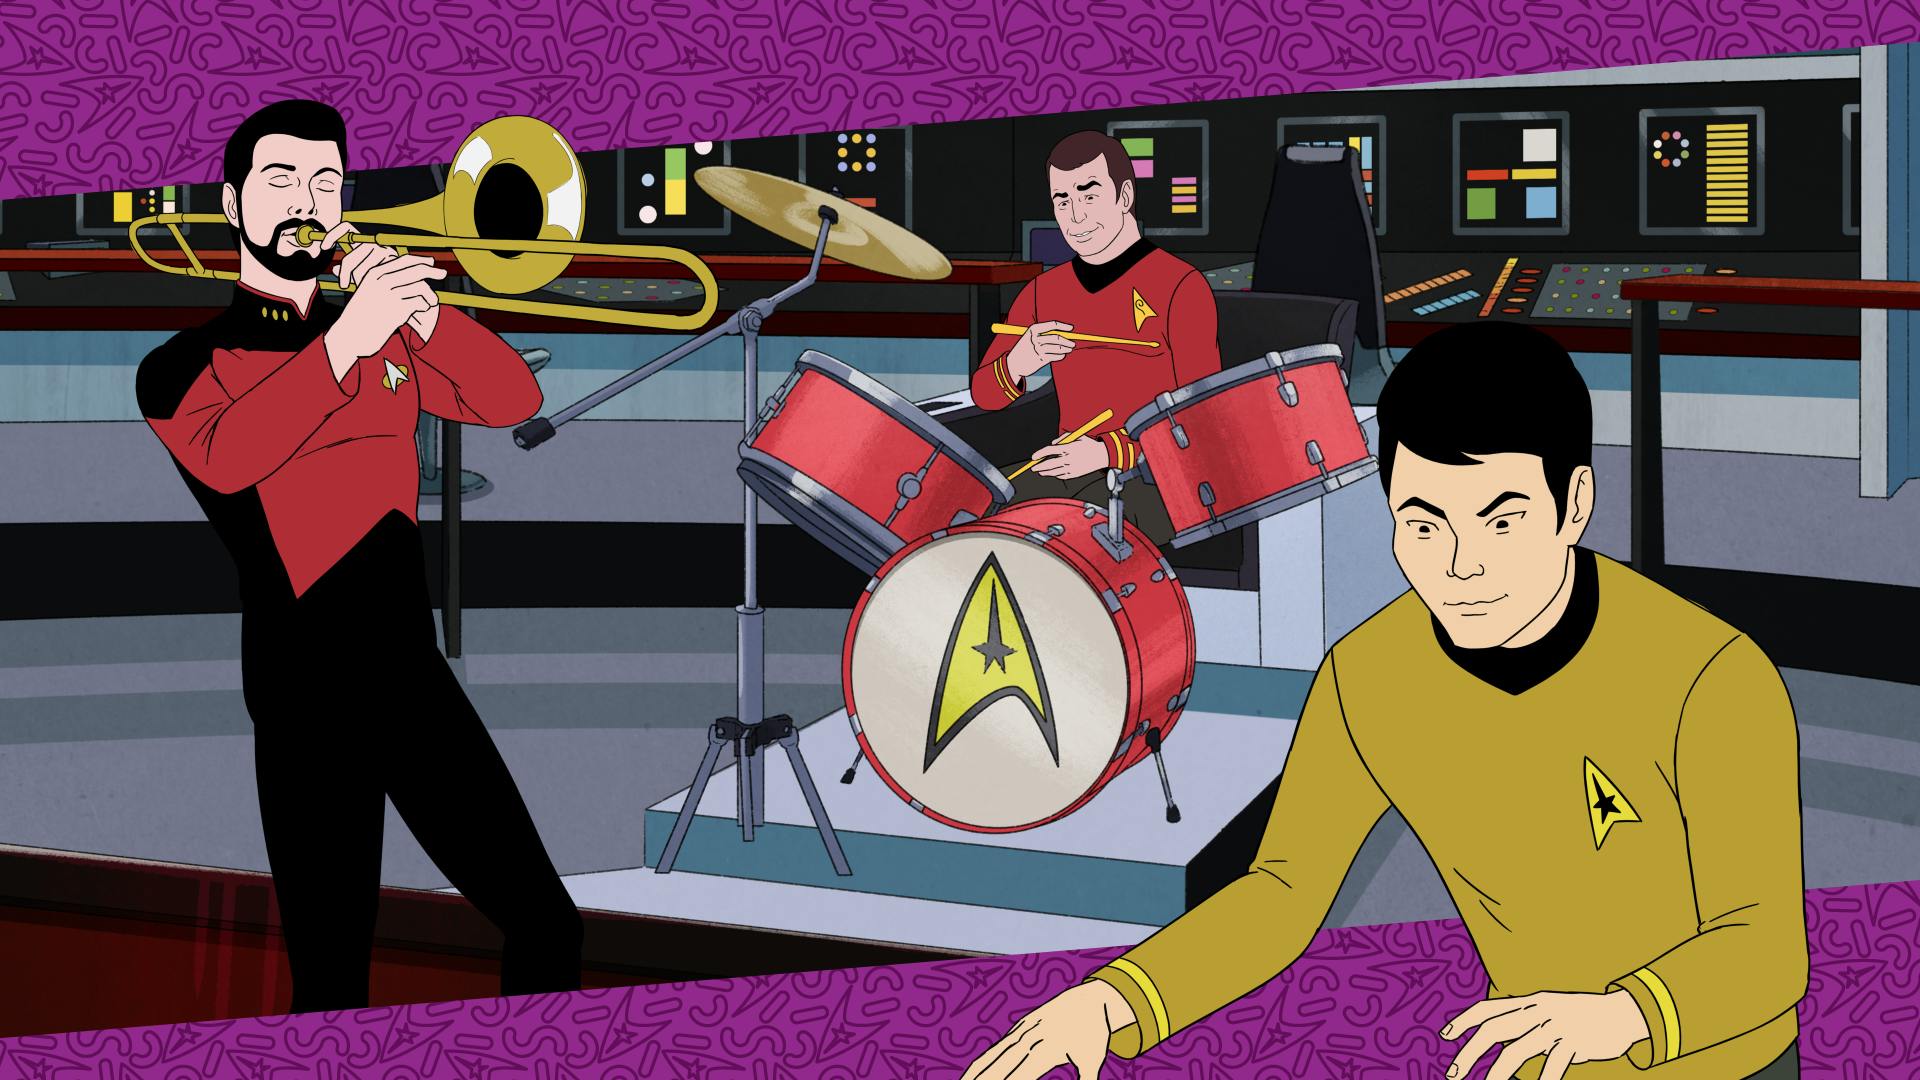 An episodic still of Star Trek: very Short Treks' 'Walk, Don't Run' with Riker on the trombone, Scotty on the drums, and Sulu on the keyboard on the bridge of the Enterprise